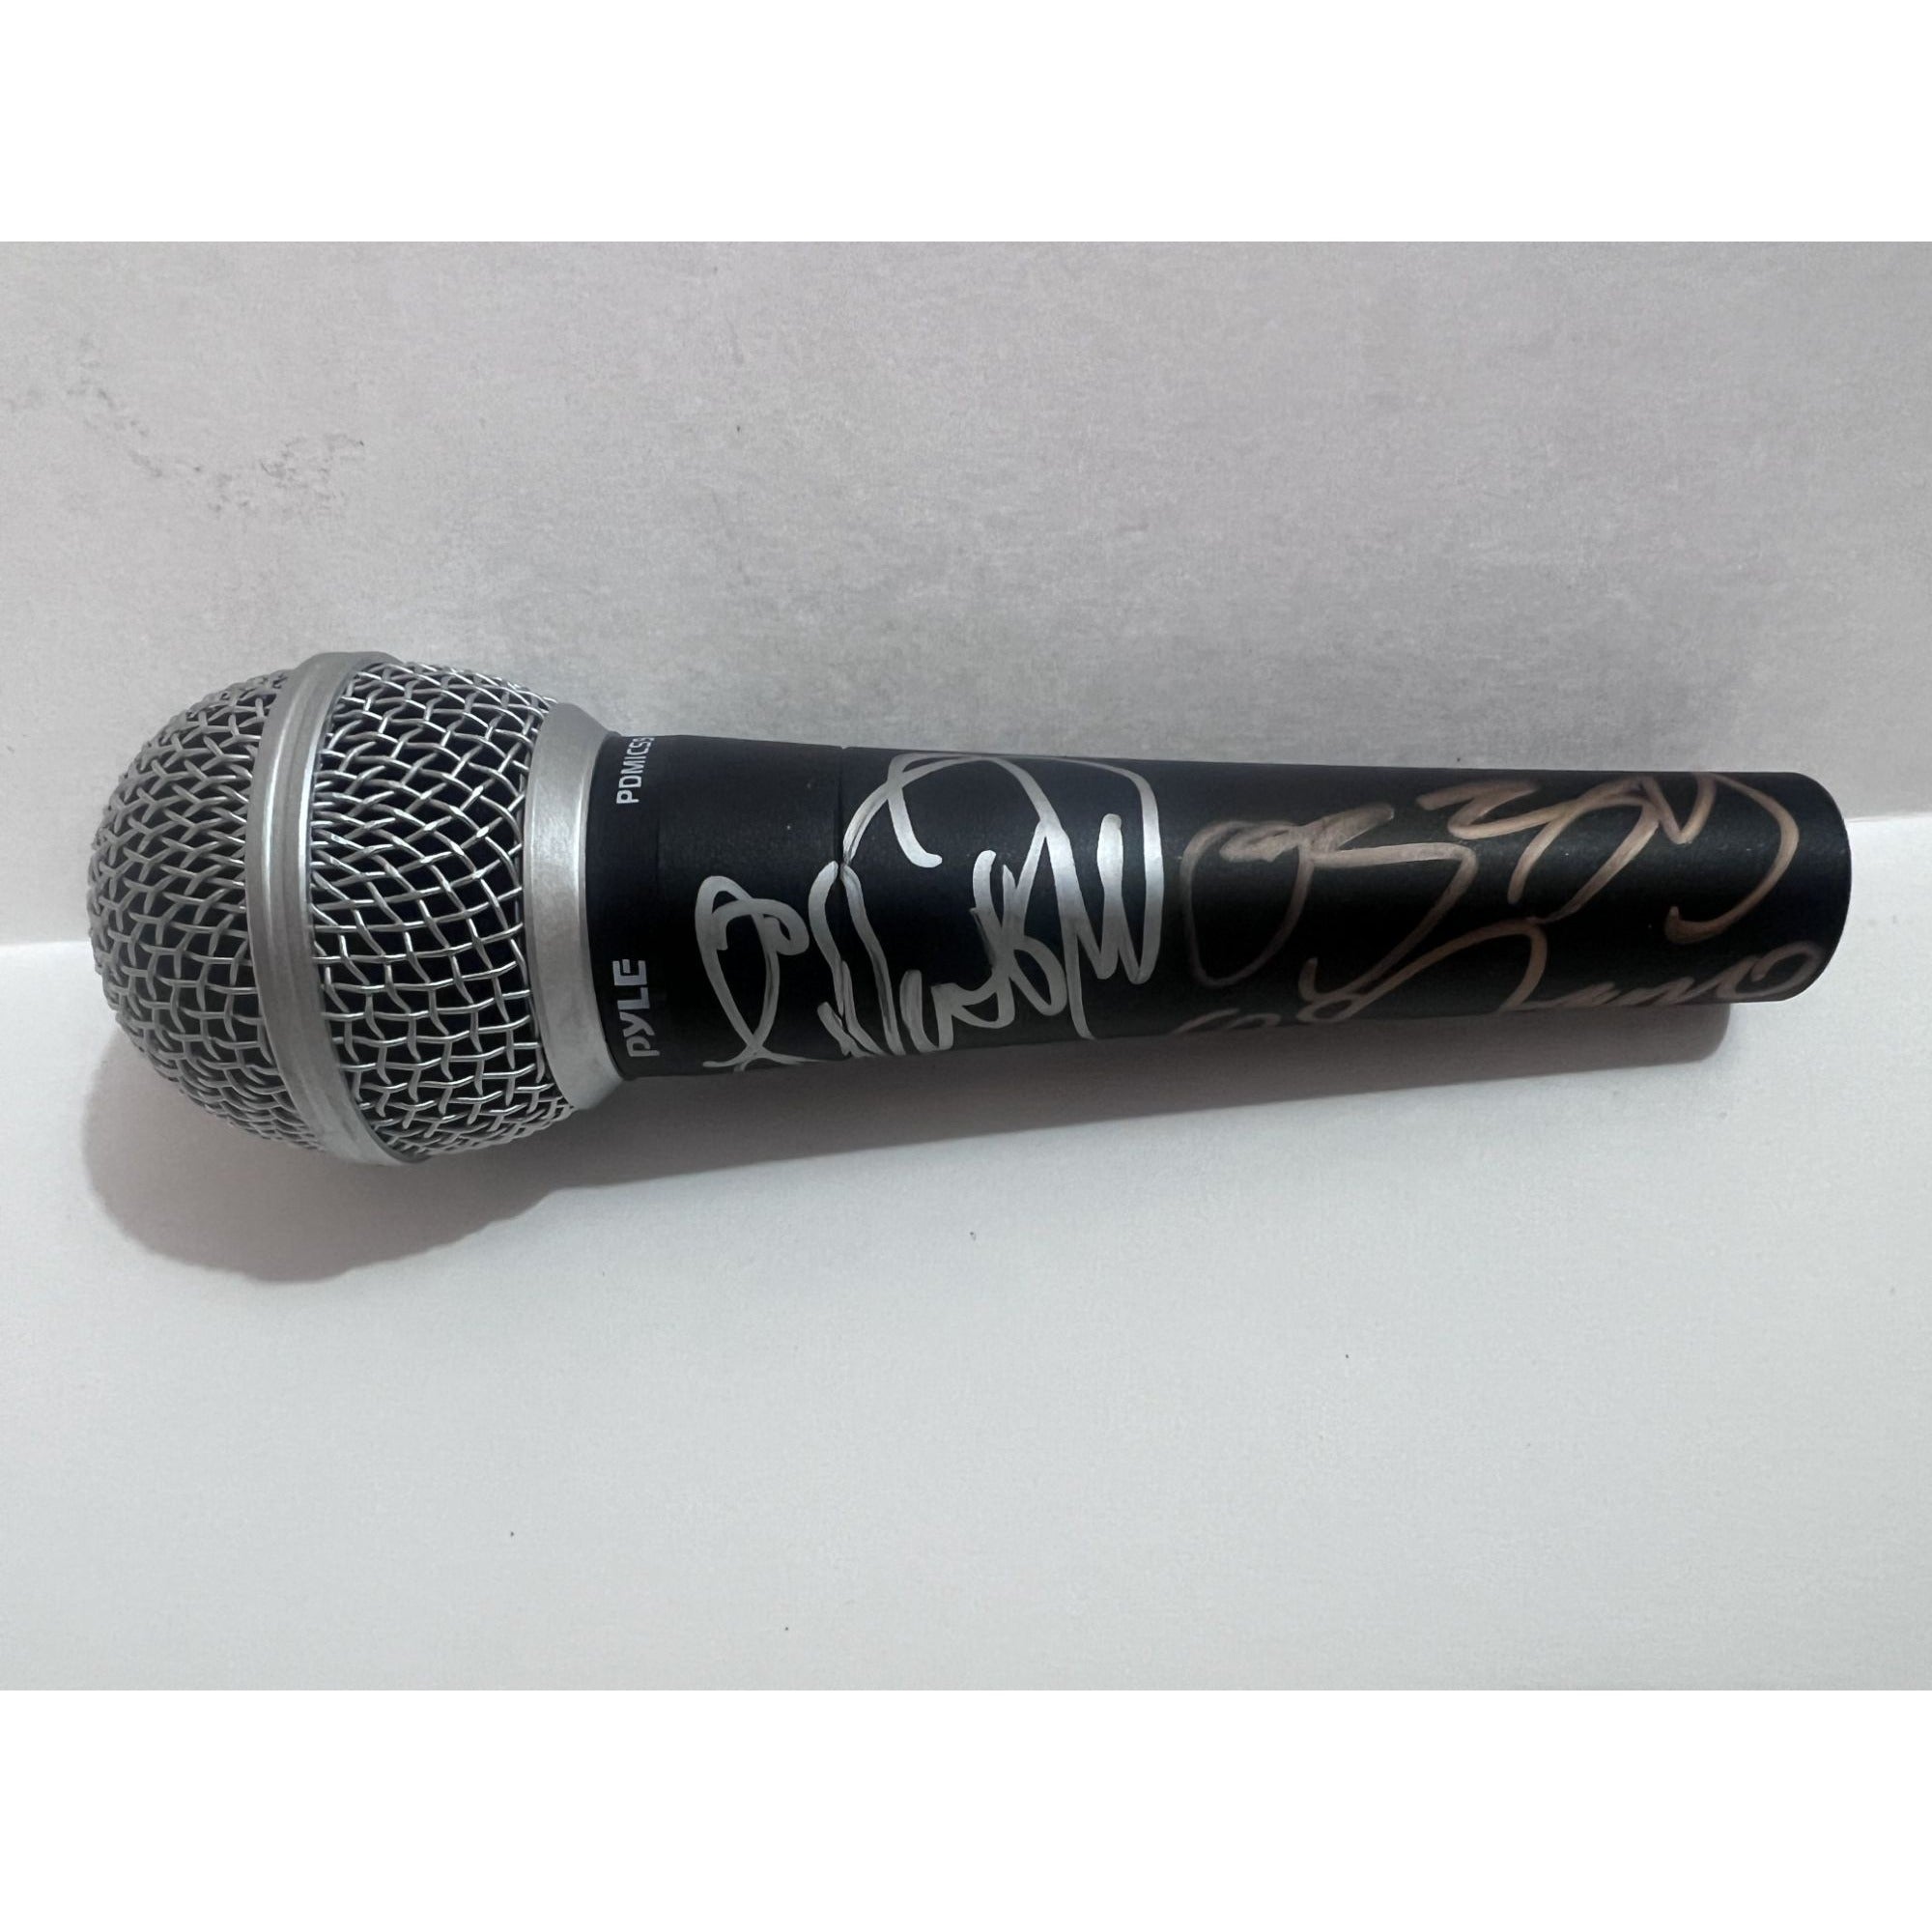 Ozzy Osbourne and Lita Ford microphone signed with proof